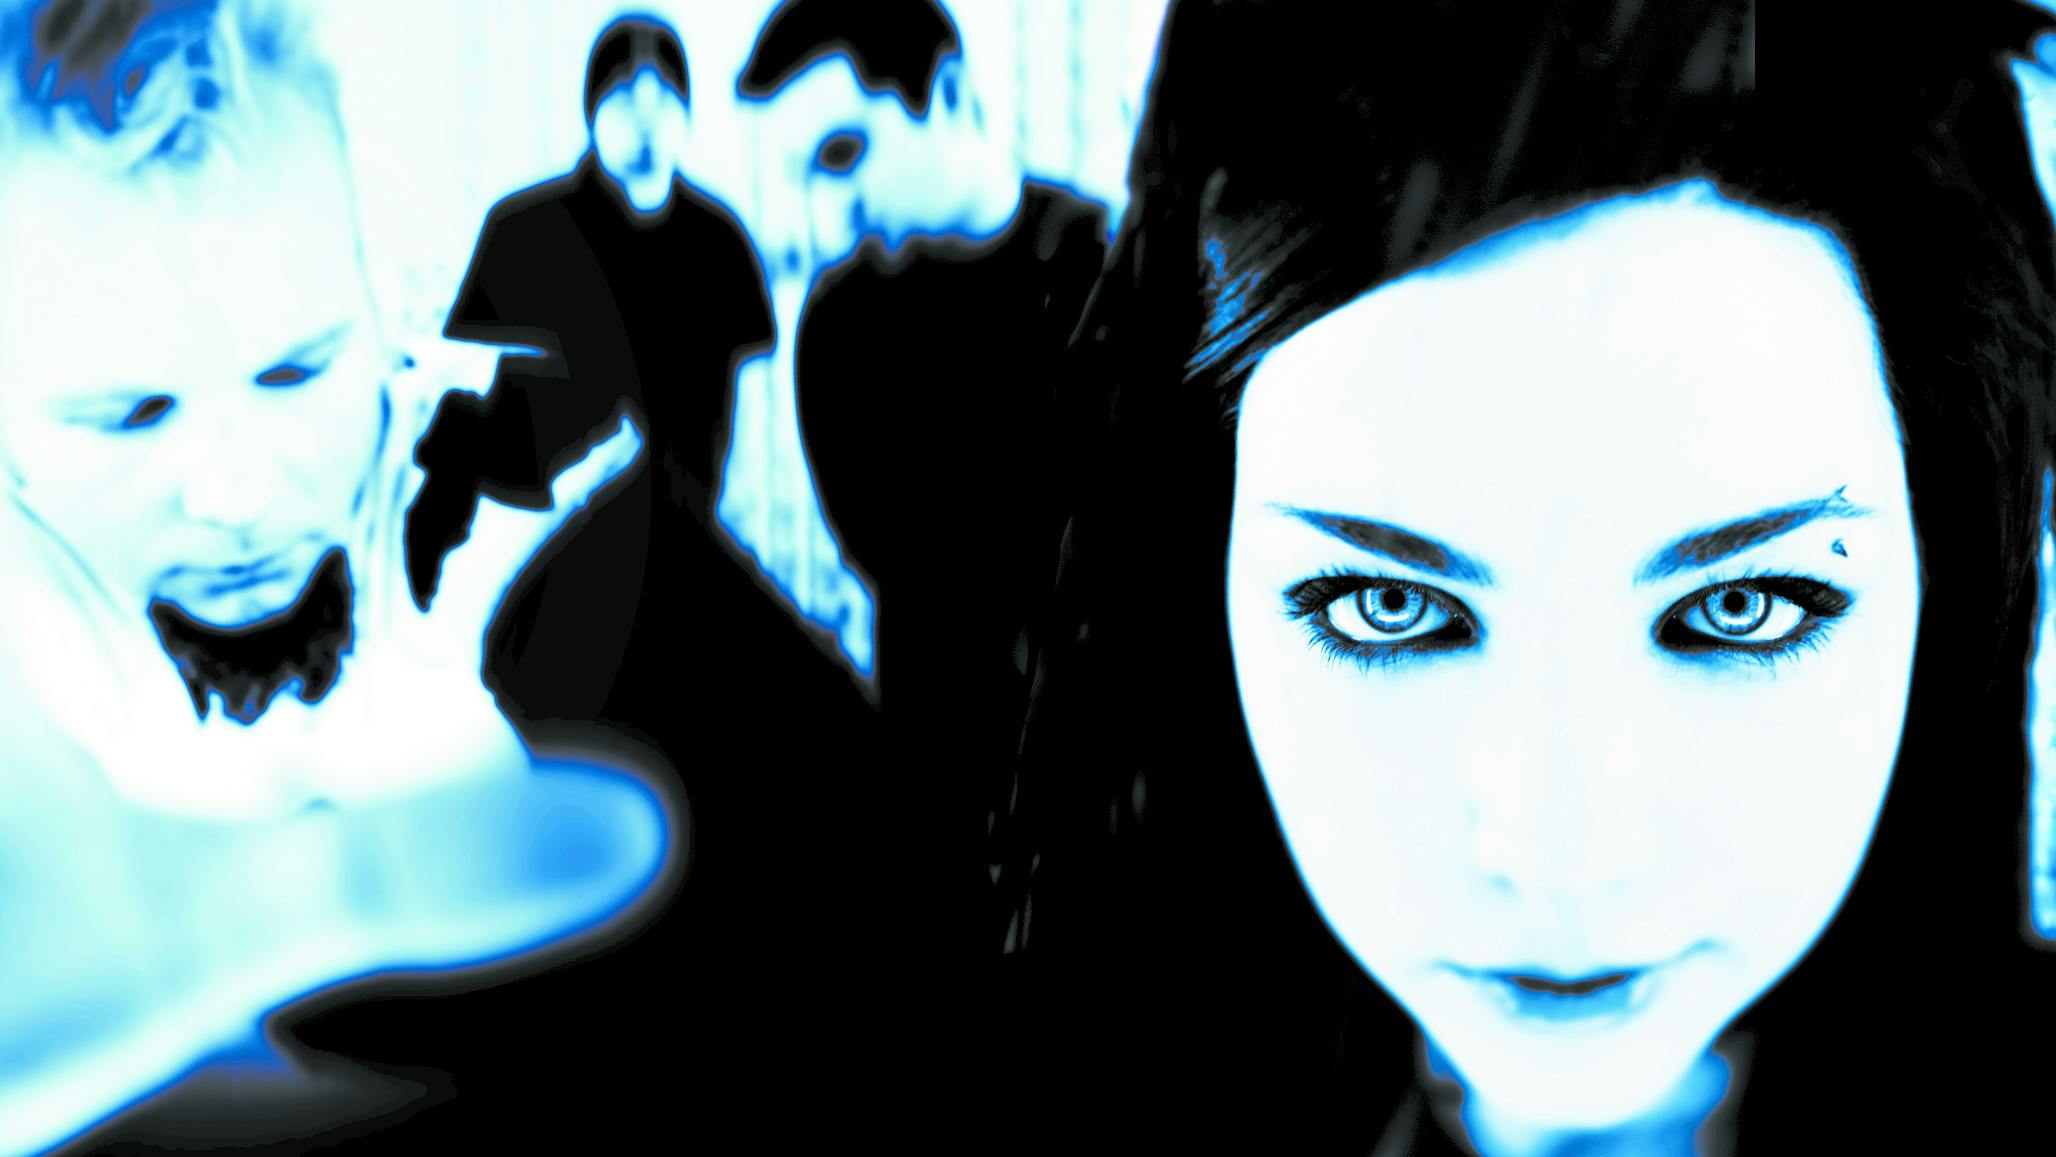 18 years of Fallen: The album that made Evanescence superstars